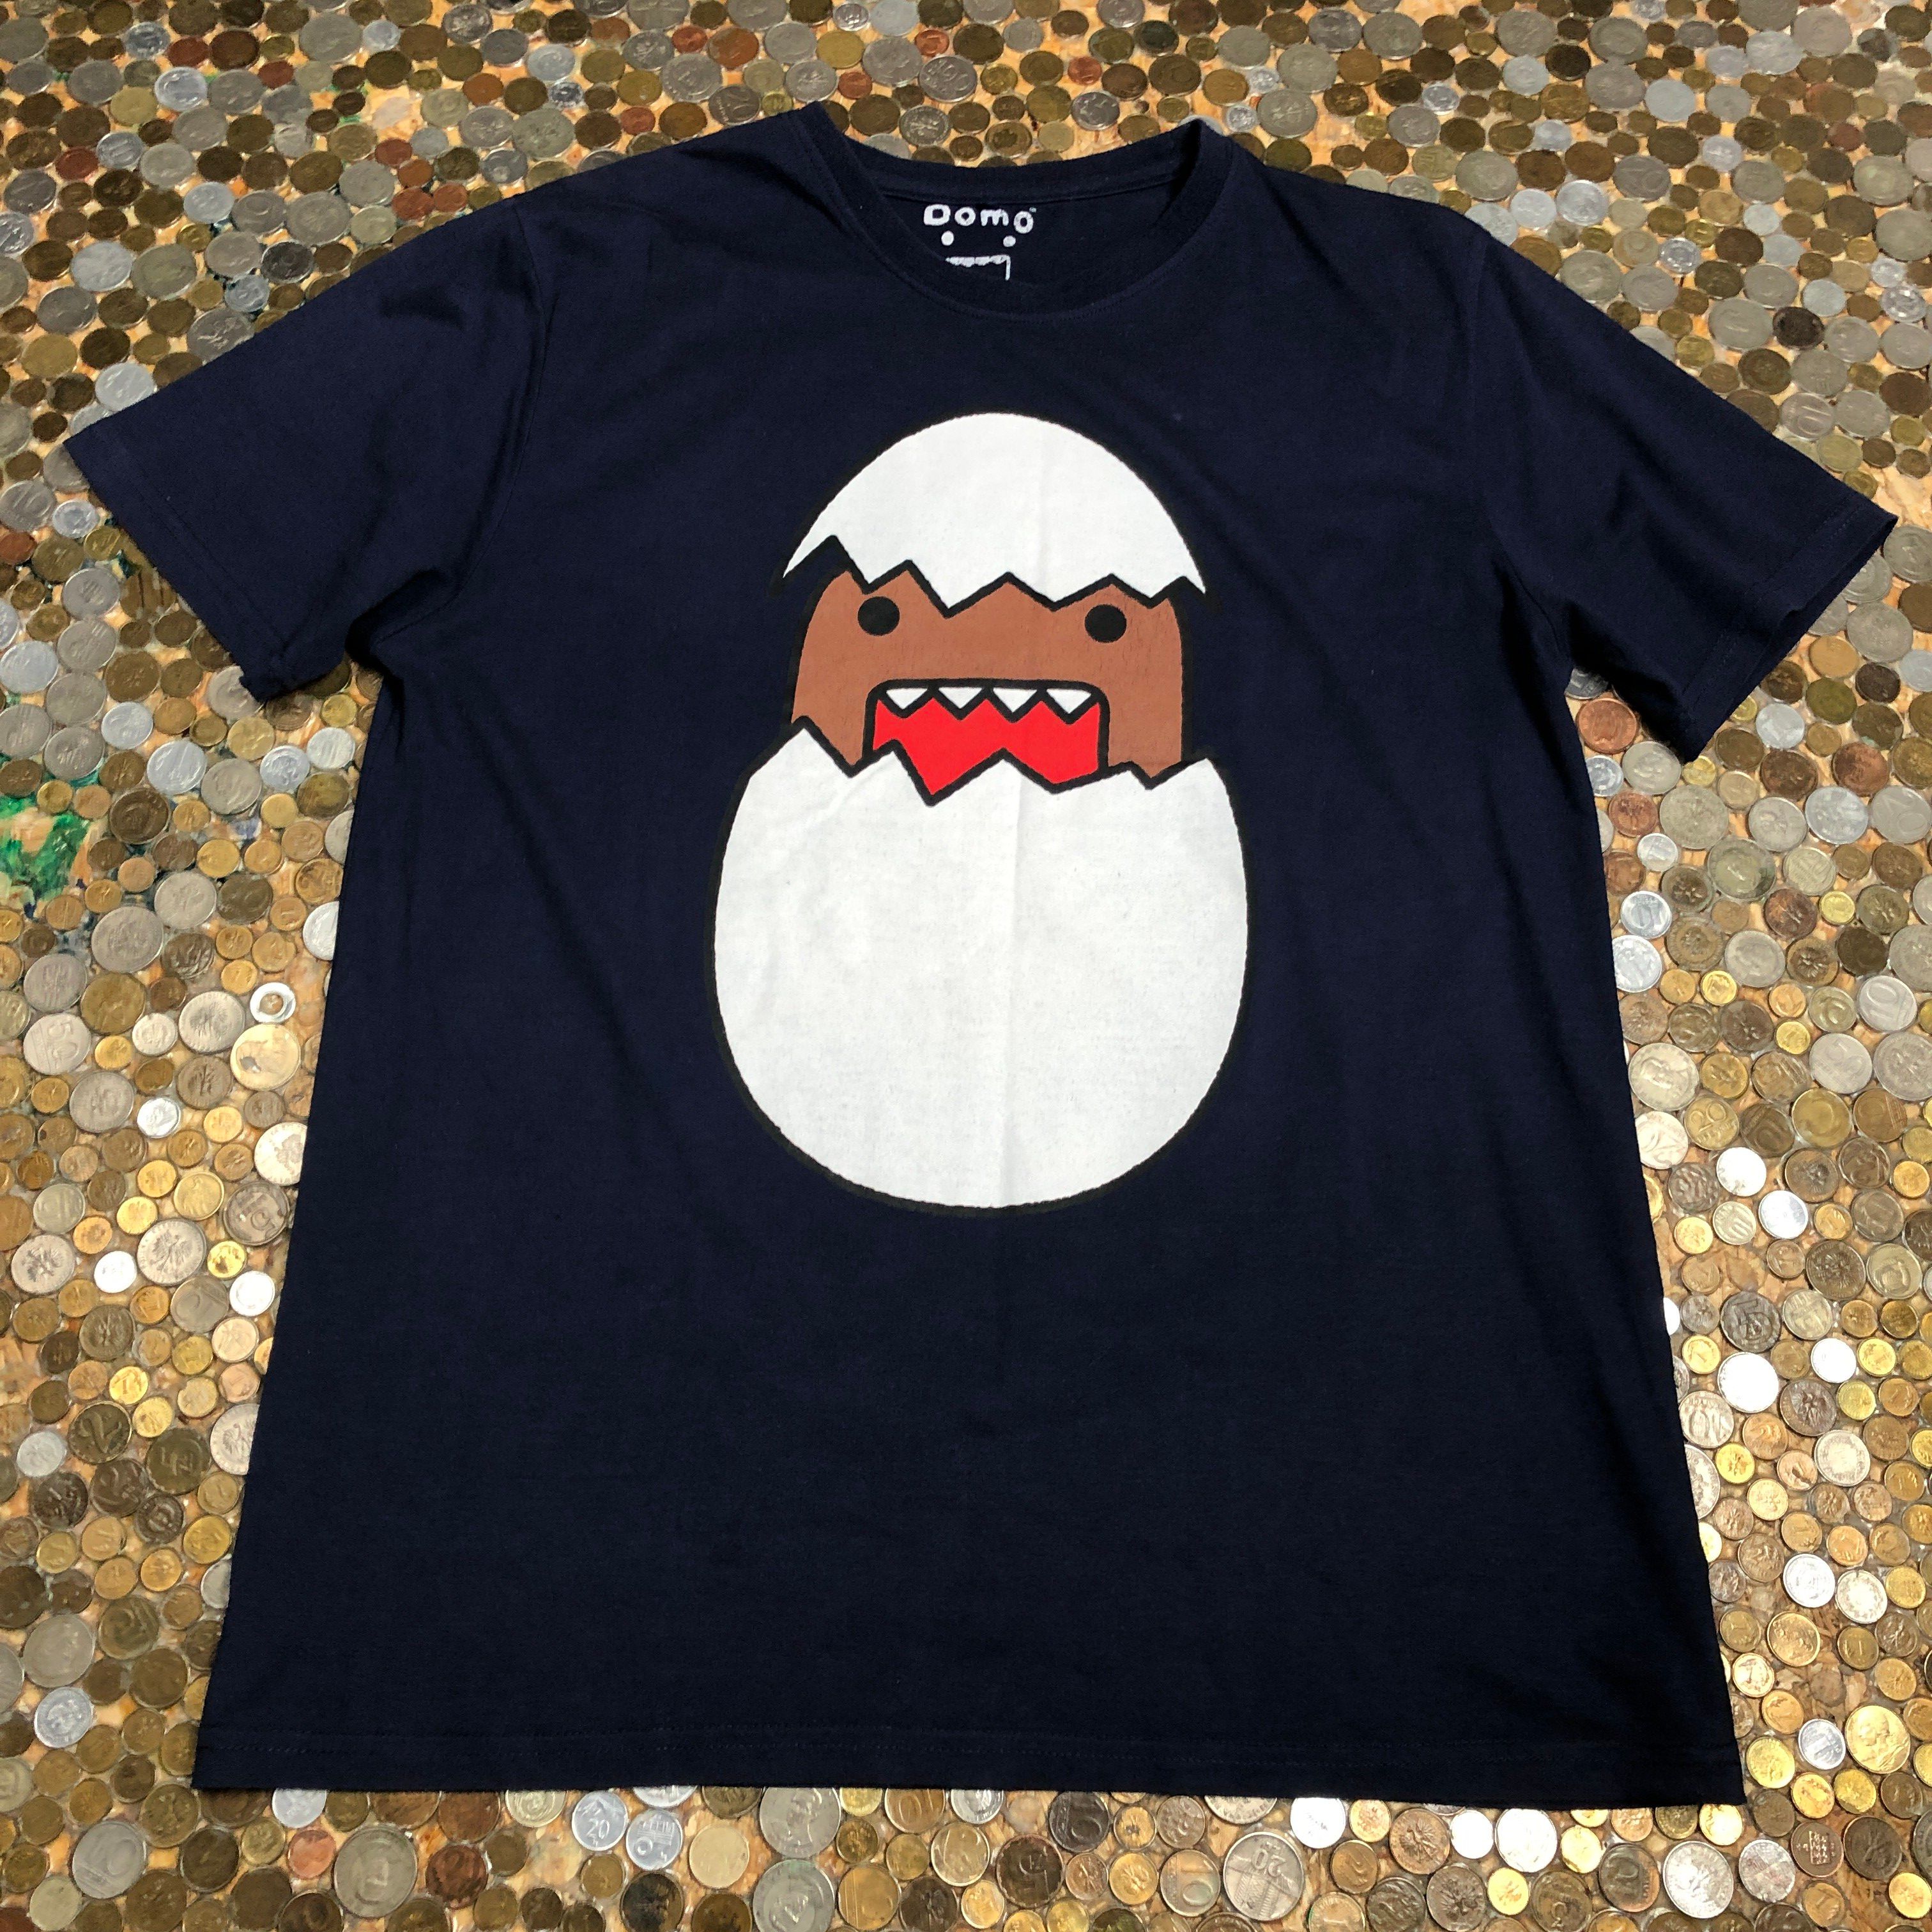 Pre-owned Vintage Domo Tee T-shirt In Navy